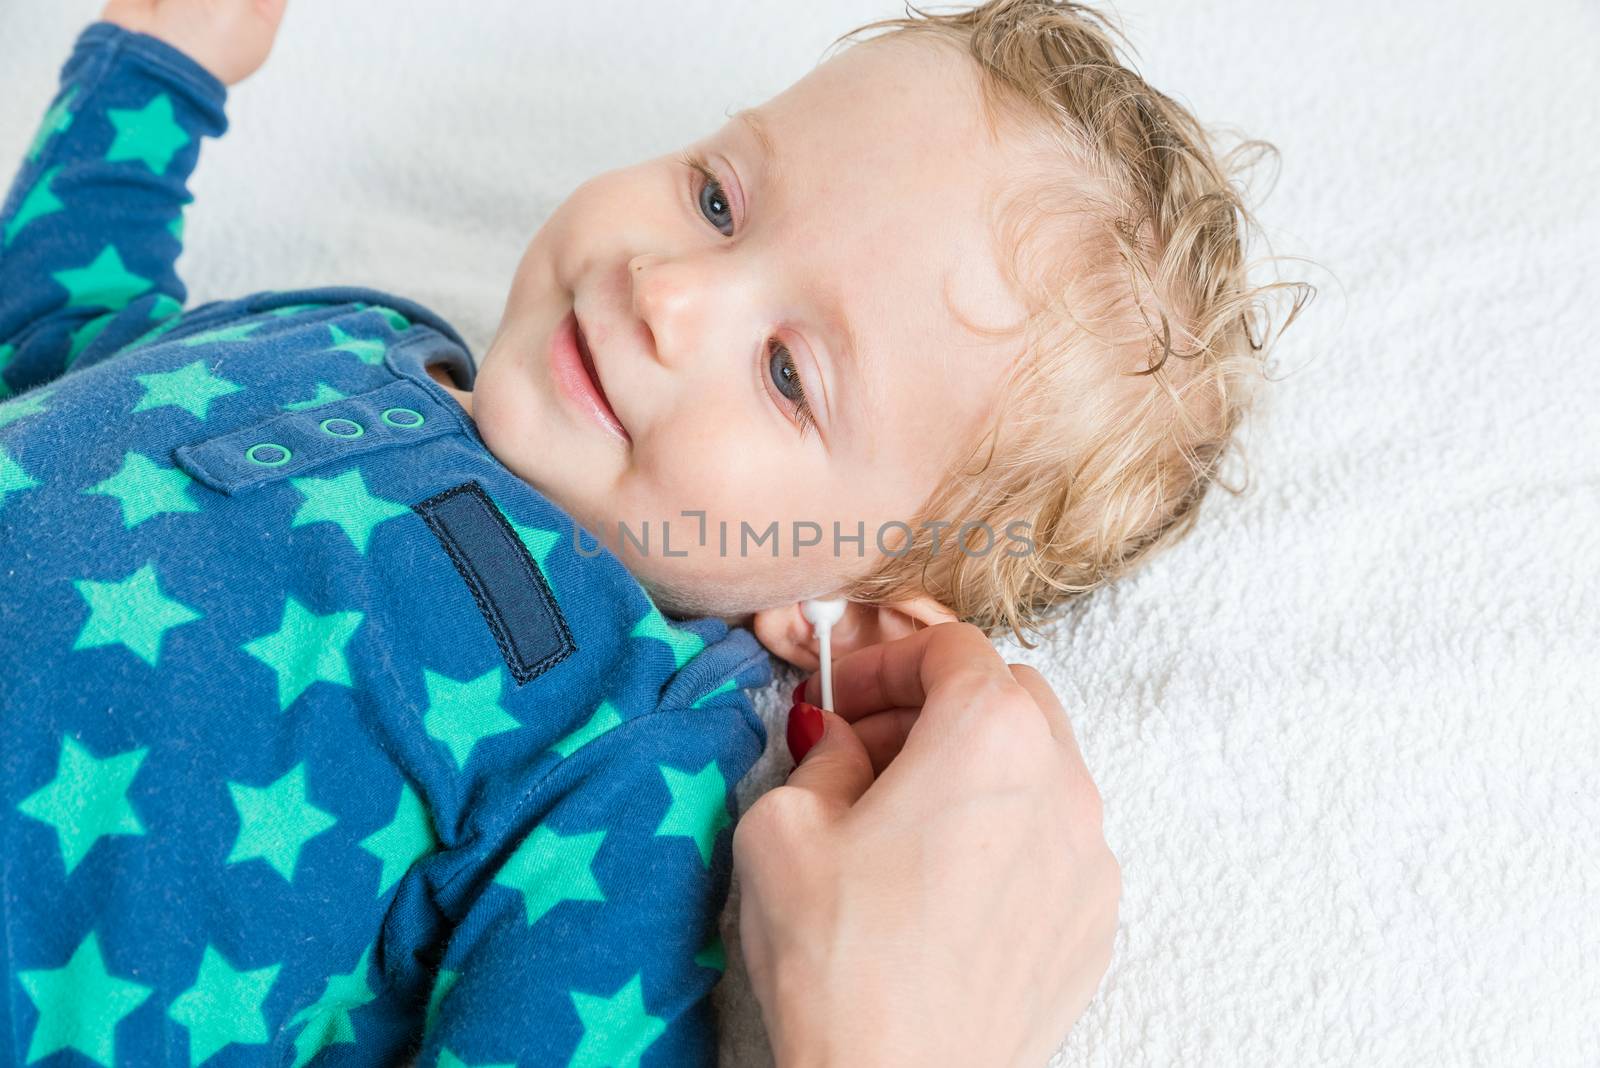 Mother hand cleaning baby ear with cotton swab by Robertobinetti70